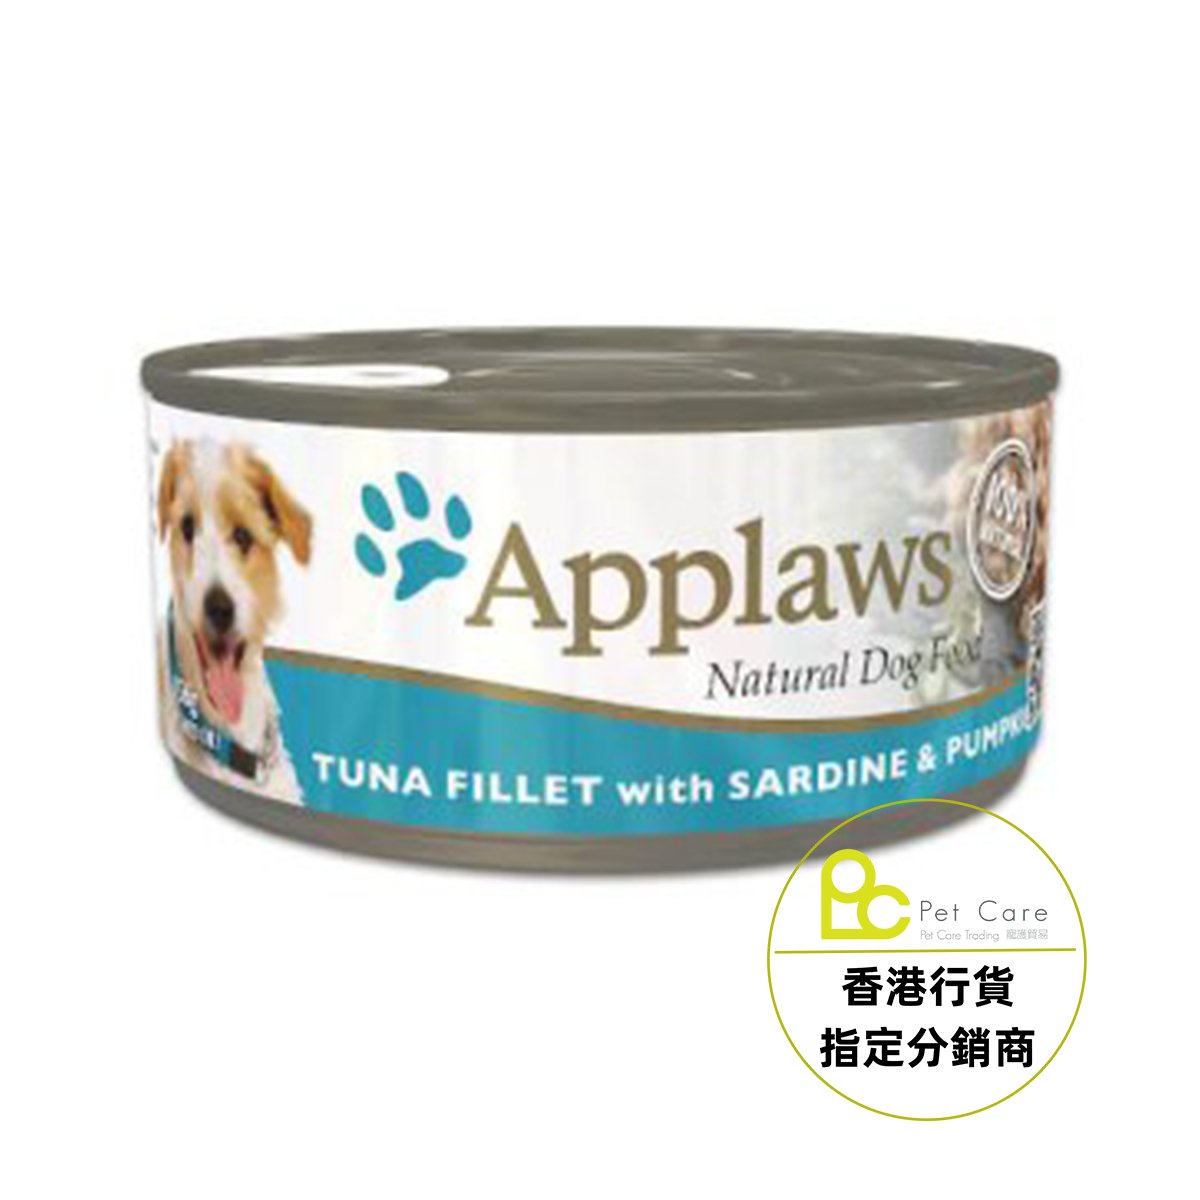 Applaws Dog All Natural Canned Dogs - Tuna, Sardines and Pumpkin 156g